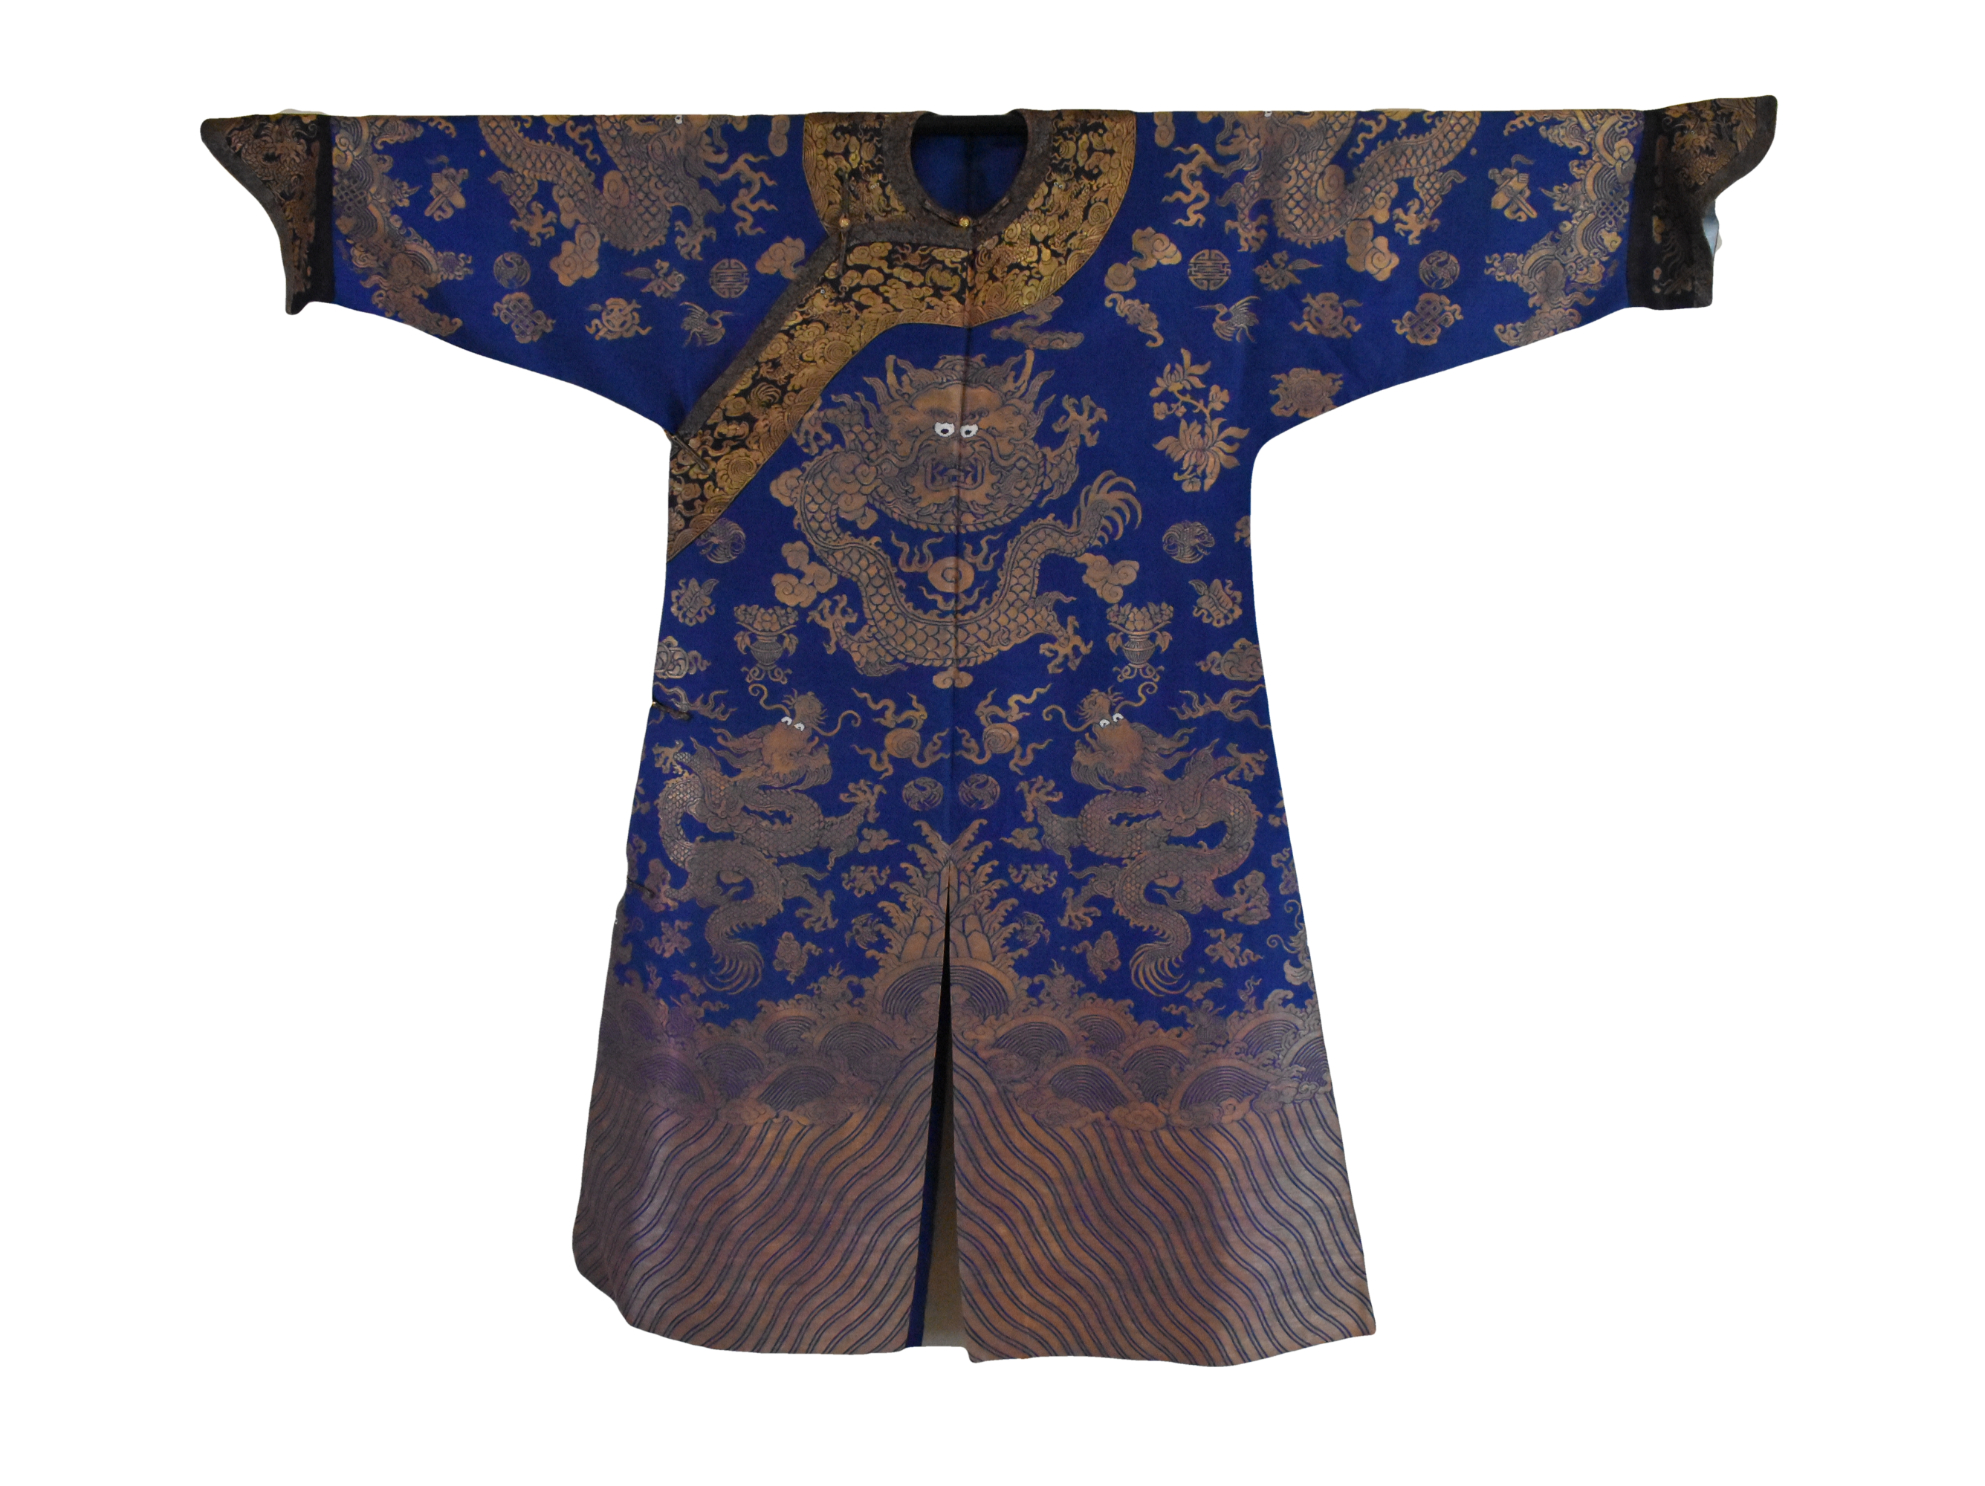 CHINESE IMPERIAL BLUE EMBROIDERY 30190b